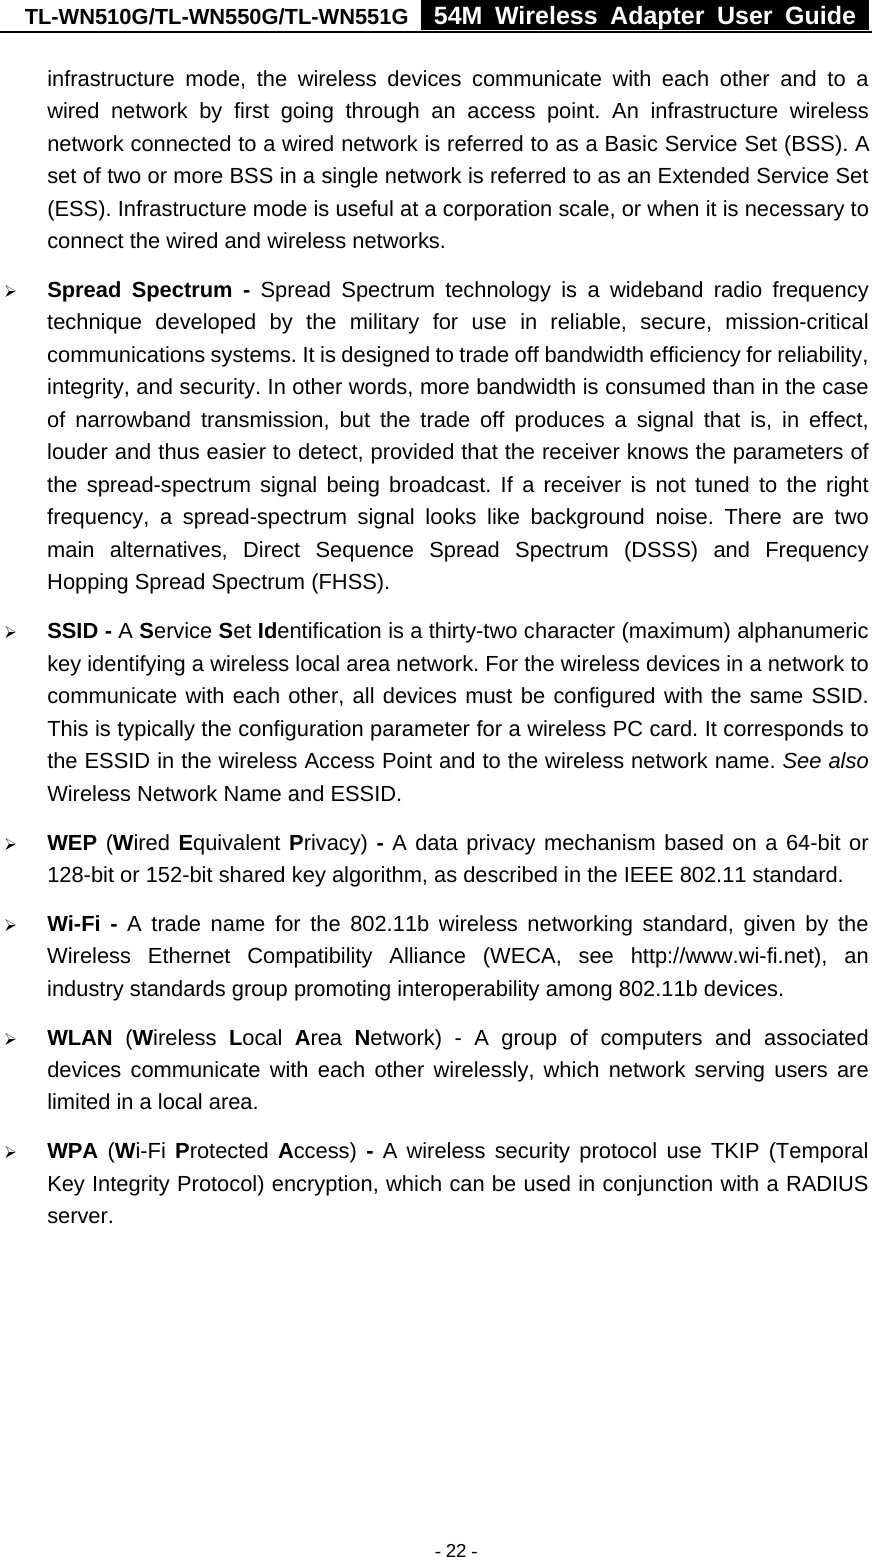 TL-WN510G/TL-WN550G/TL-WN551G  54M Wireless Adapter User Guide   - 22 -infrastructure mode, the wireless devices communicate with each other and to a wired network by first going through an access point. An infrastructure wireless network connected to a wired network is referred to as a Basic Service Set (BSS). A set of two or more BSS in a single network is referred to as an Extended Service Set (ESS). Infrastructure mode is useful at a corporation scale, or when it is necessary to connect the wired and wireless networks.   ¾ Spread Spectrum - Spread Spectrum technology is a wideband radio frequency technique developed by the military for use in reliable, secure, mission-critical communications systems. It is designed to trade off bandwidth efficiency for reliability, integrity, and security. In other words, more bandwidth is consumed than in the case of narrowband transmission, but the trade off produces a signal that is, in effect, louder and thus easier to detect, provided that the receiver knows the parameters of the spread-spectrum signal being broadcast. If a receiver is not tuned to the right frequency, a spread-spectrum signal looks like background noise. There are two main alternatives, Direct Sequence Spread Spectrum (DSSS) and Frequency Hopping Spread Spectrum (FHSS). ¾ SSID - A Service Set Identification is a thirty-two character (maximum) alphanumeric key identifying a wireless local area network. For the wireless devices in a network to communicate with each other, all devices must be configured with the same SSID. This is typically the configuration parameter for a wireless PC card. It corresponds to the ESSID in the wireless Access Point and to the wireless network name. See also Wireless Network Name and ESSID. ¾ WEP (Wired Equivalent Privacy) - A data privacy mechanism based on a 64-bit or 128-bit or 152-bit shared key algorithm, as described in the IEEE 802.11 standard.   ¾ Wi-Fi - A trade name for the 802.11b wireless networking standard, given by the Wireless Ethernet Compatibility Alliance (WECA, see http://www.wi-fi.net), an industry standards group promoting interoperability among 802.11b devices. ¾ WLAN (Wireless  Local  Area  Network) - A group of computers and associated devices communicate with each other wirelessly, which network serving users are limited in a local area. ¾ WPA (Wi-Fi Protected Access) - A wireless security protocol use TKIP (Temporal Key Integrity Protocol) encryption, which can be used in conjunction with a RADIUS server.  